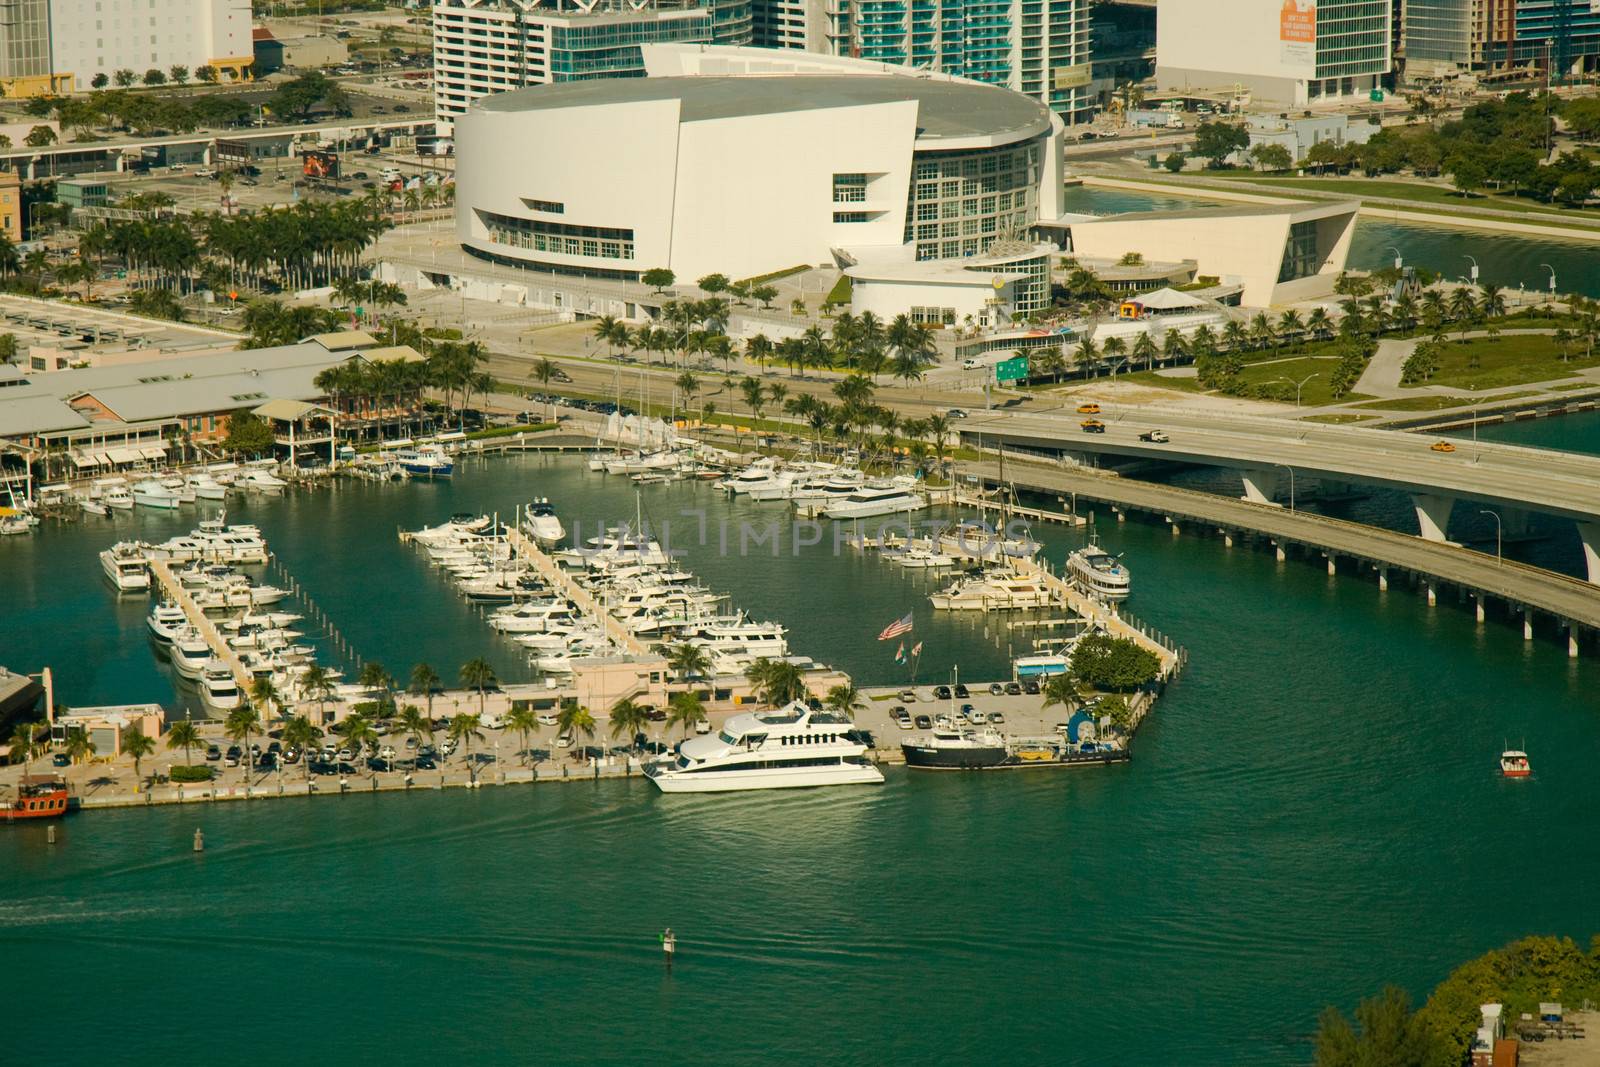 Aerial view of American Airlines Arena at the waterfront, Miami, Miami-Dade County, Florida, USA